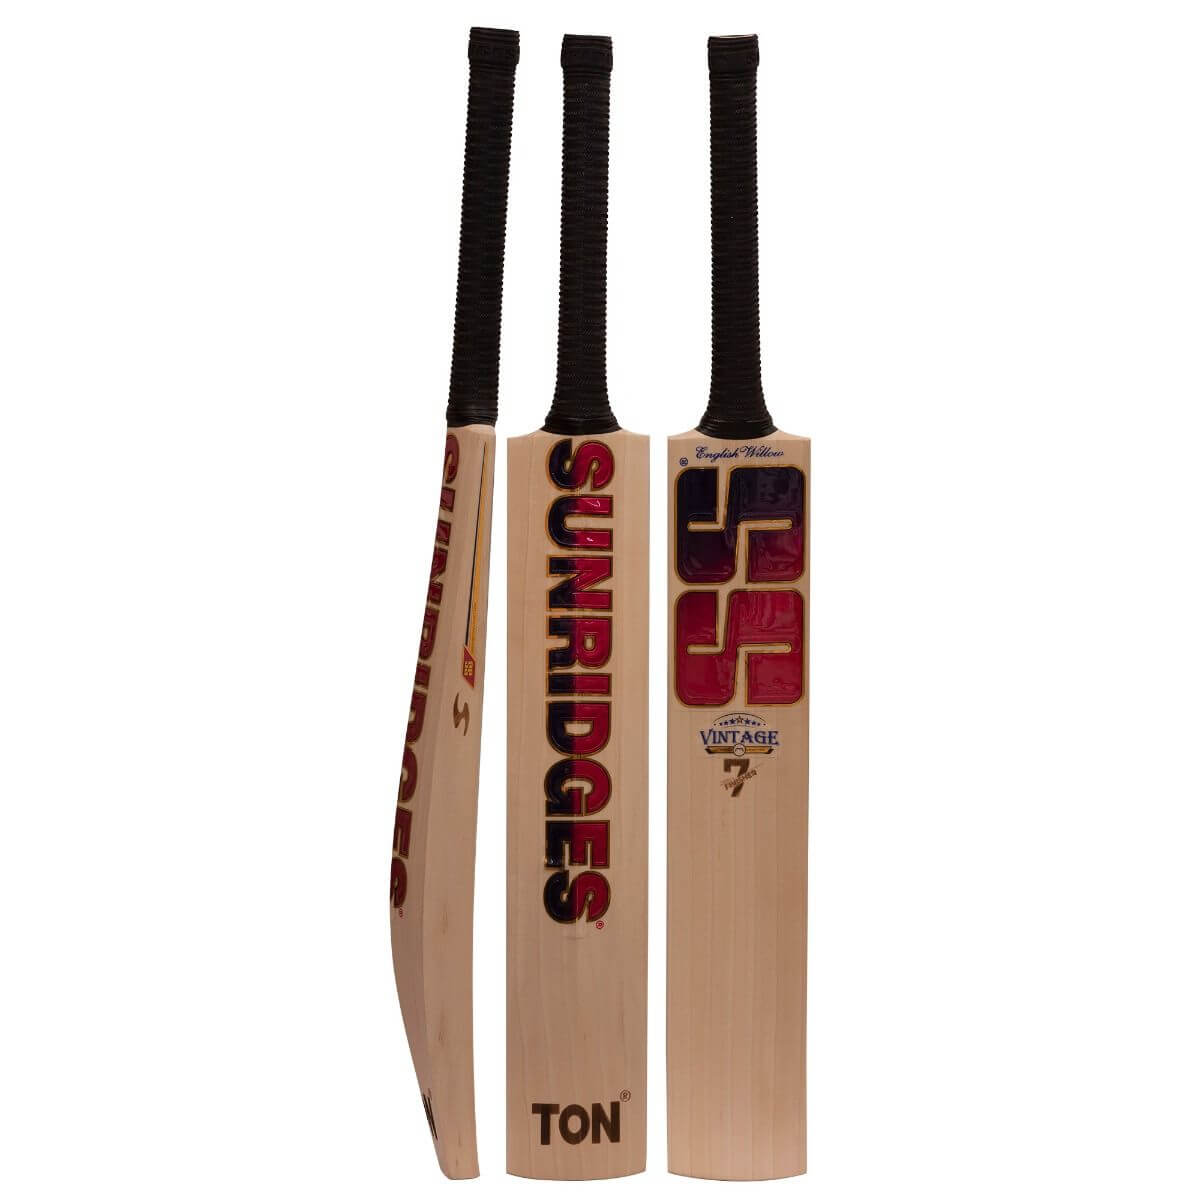 SS Vintage finisher 7 English Willow Cricket Bat – SH – Sports Wing